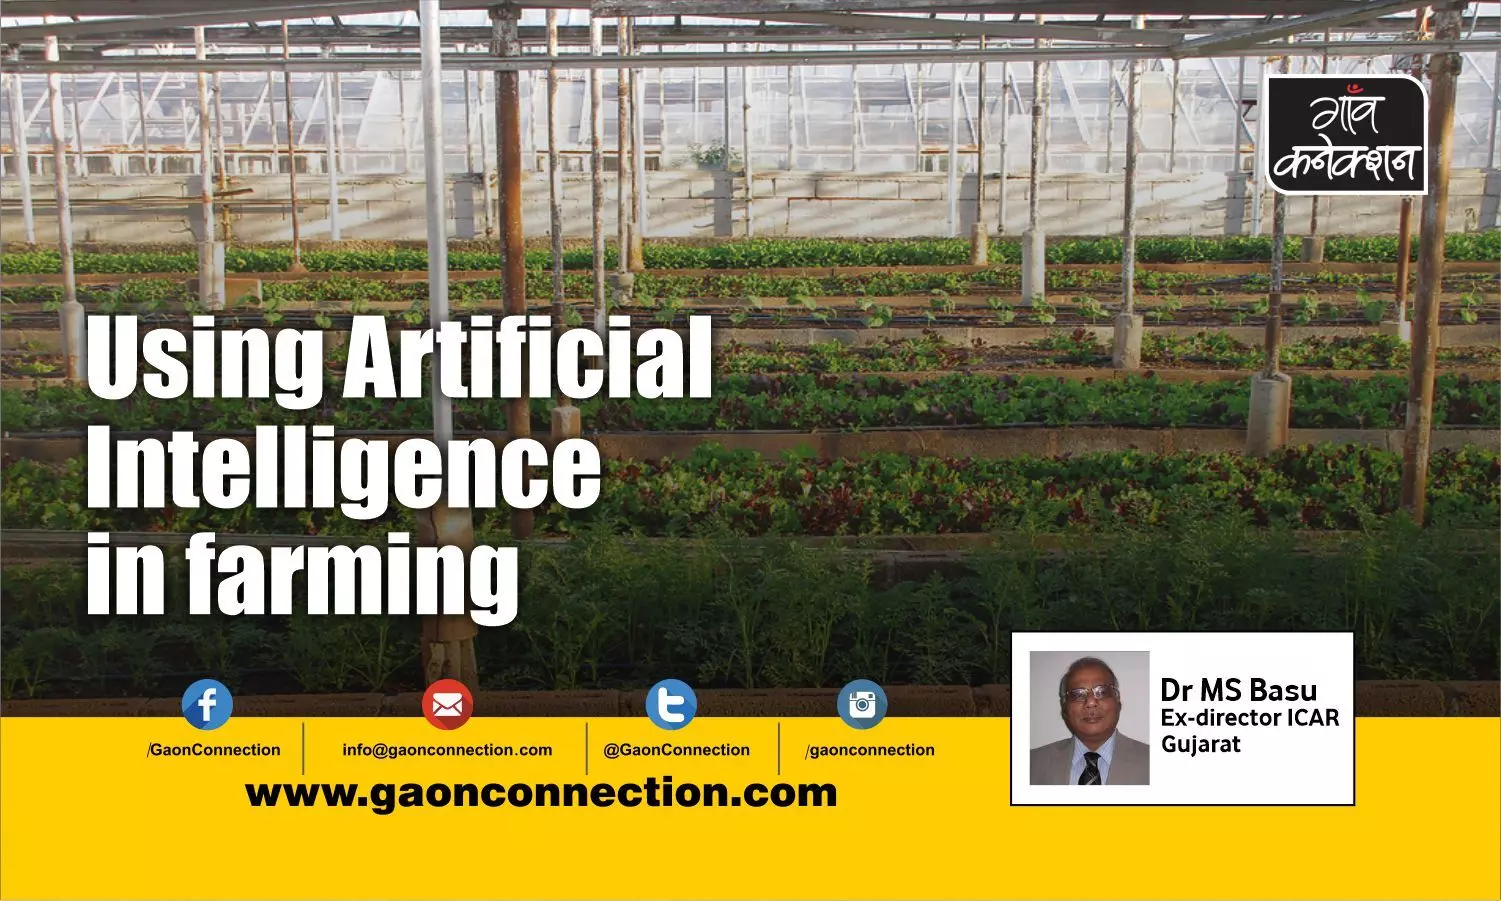 Now manage orchards, plantations using Artificial Intelligence